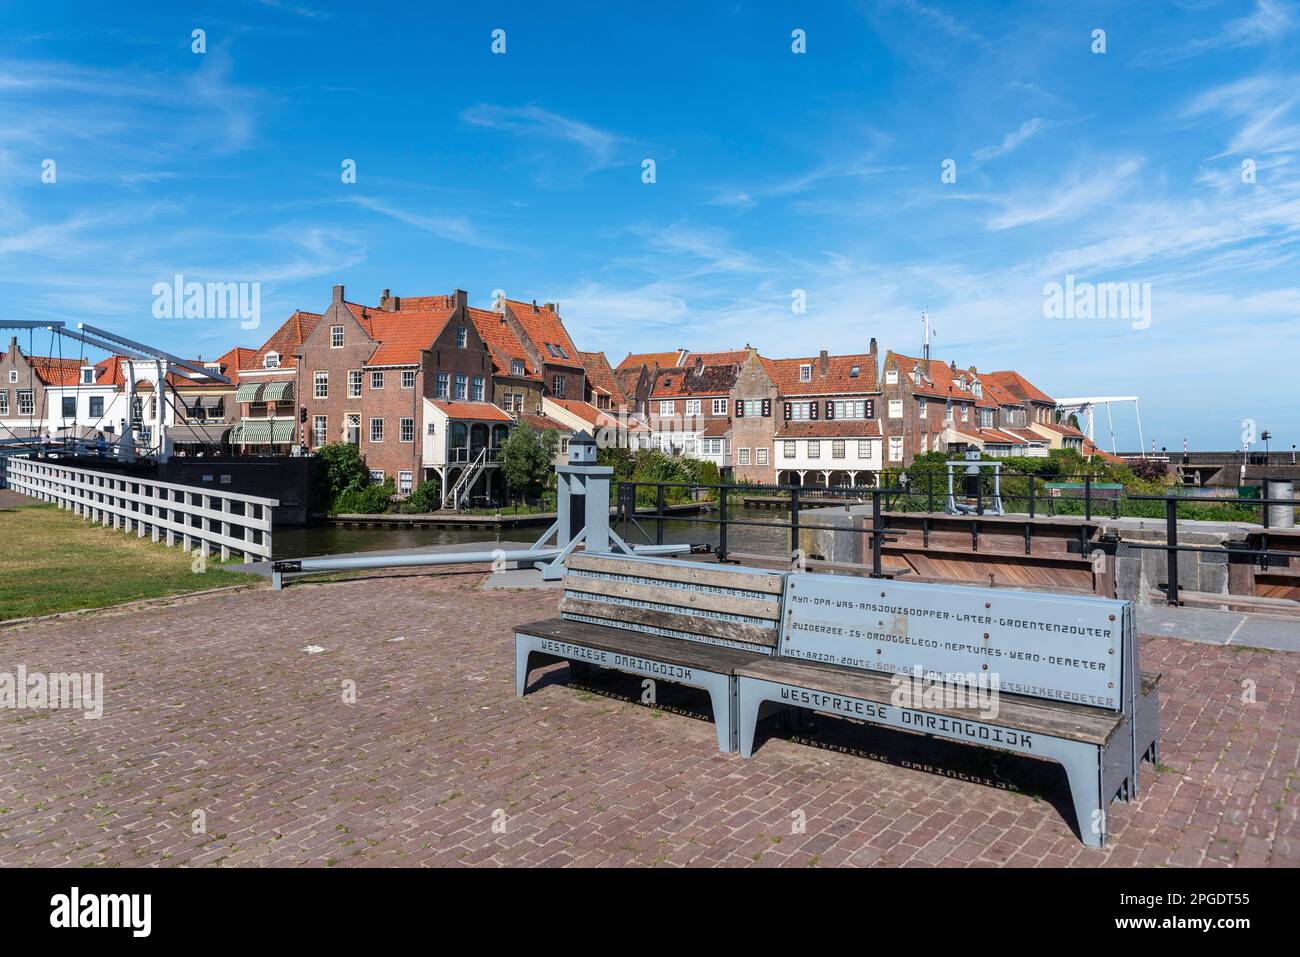 Historic old town near the old port, Enkhuizen, North Holland, Netherlands, Europe Stock Photo